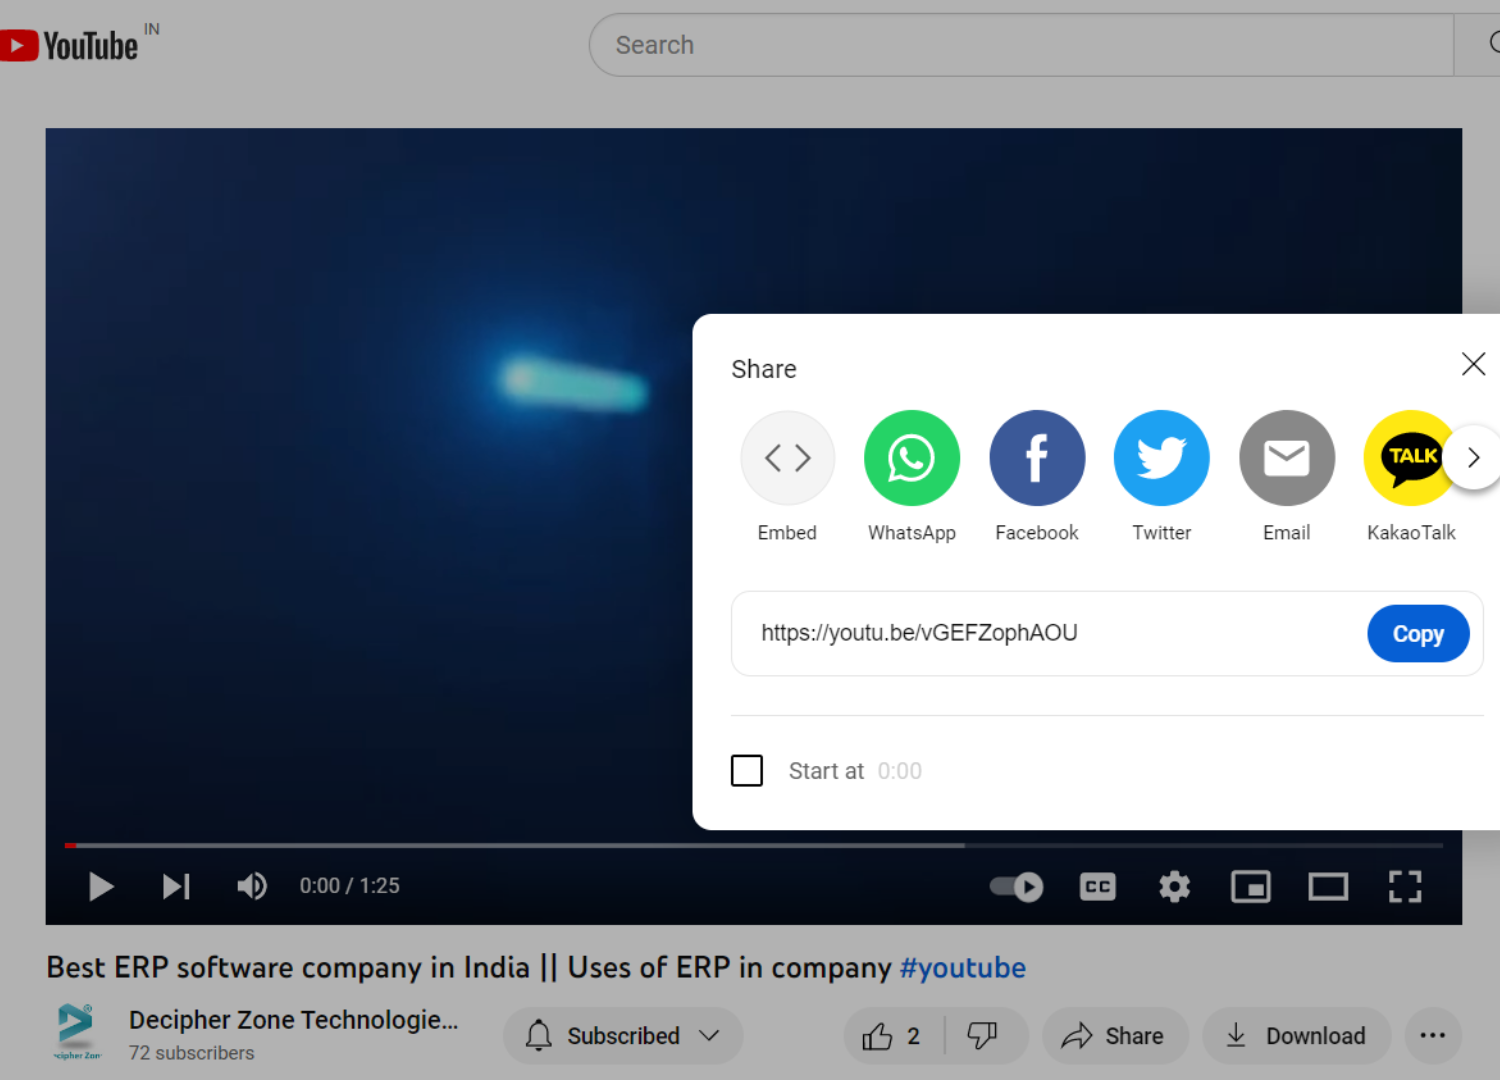 How To Download Videos From YouTube In Different Ways